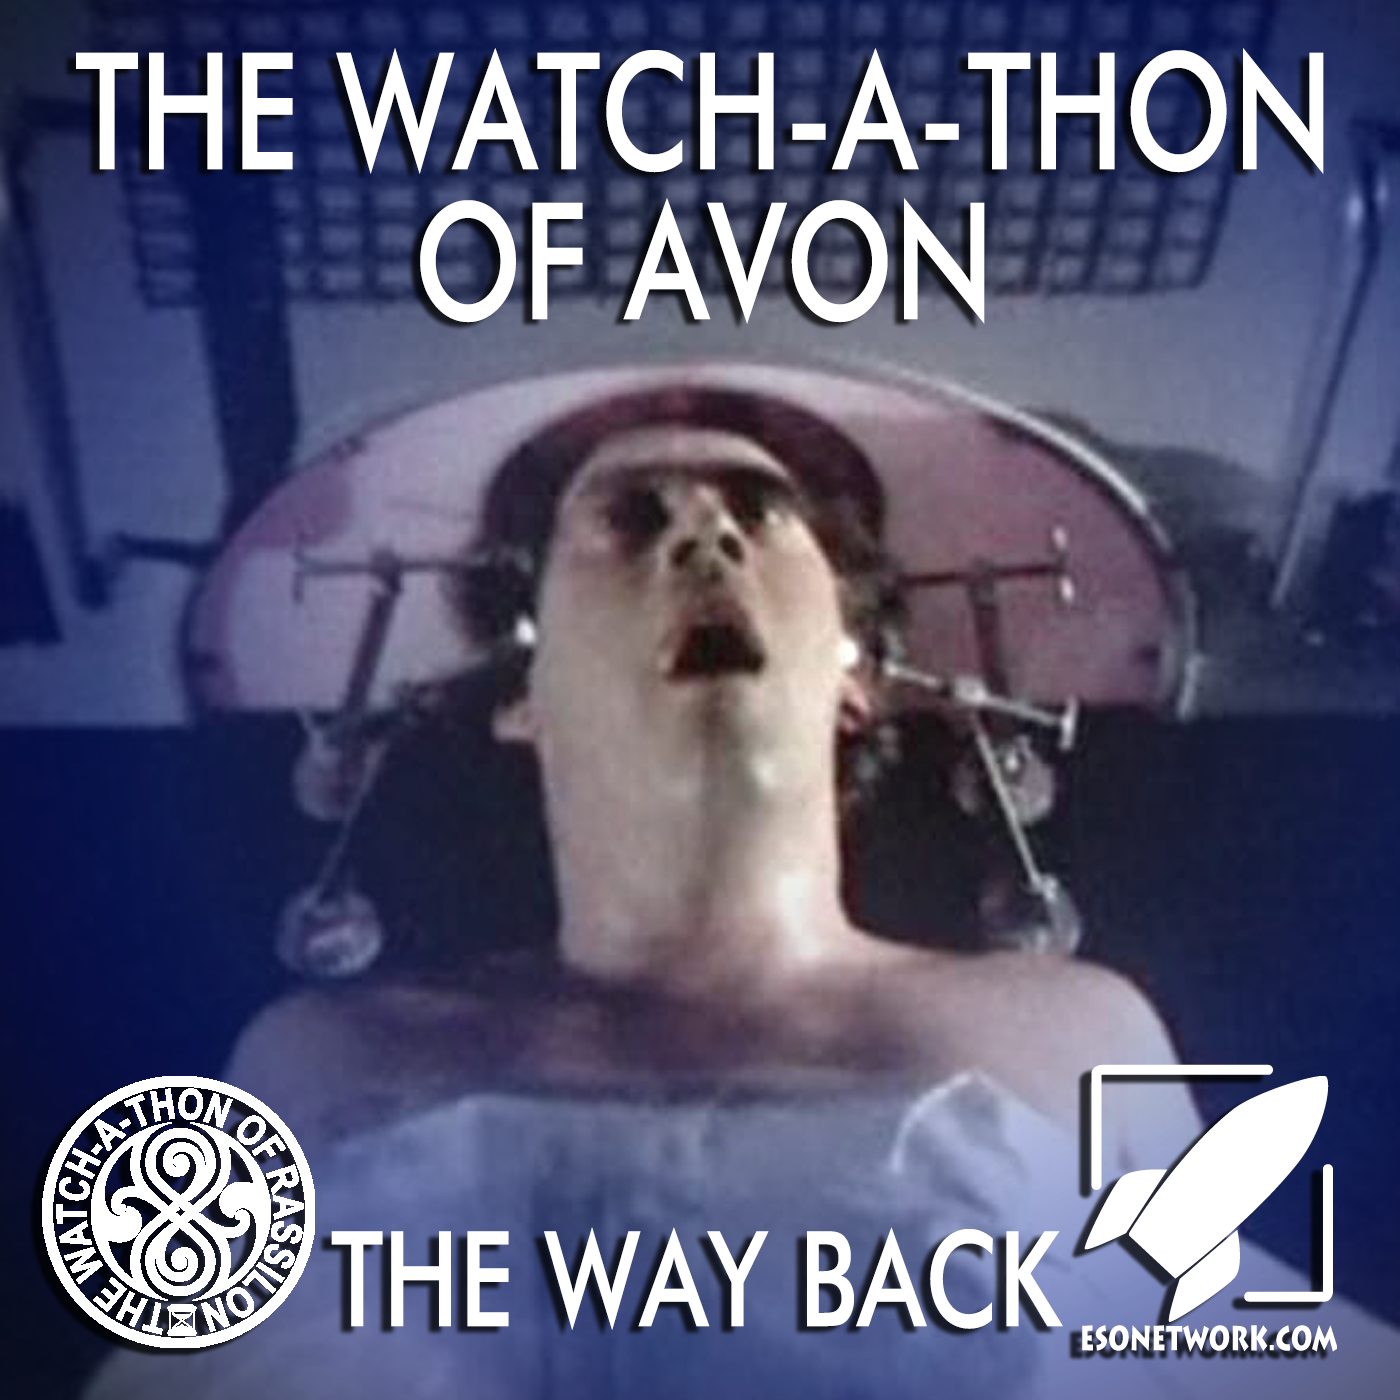 The Watch-A-Thon of Avon: The Way Back